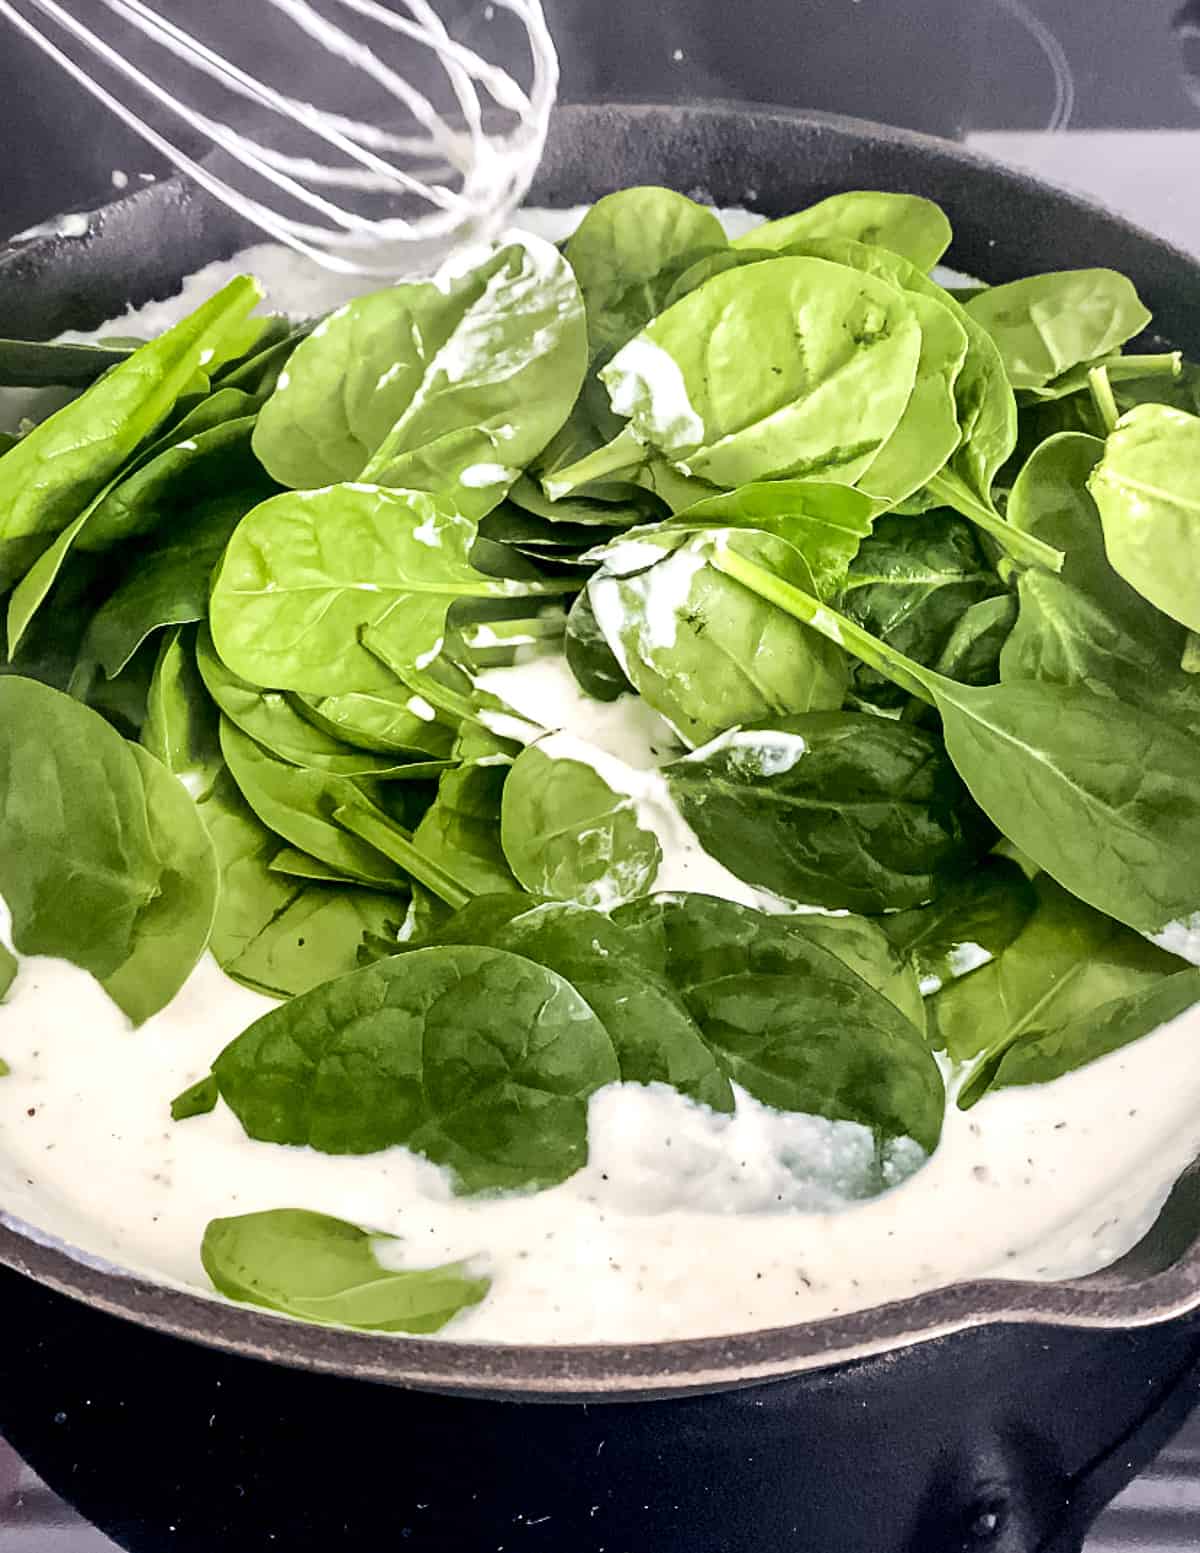 Spinach wilting in the ricotta sauce.